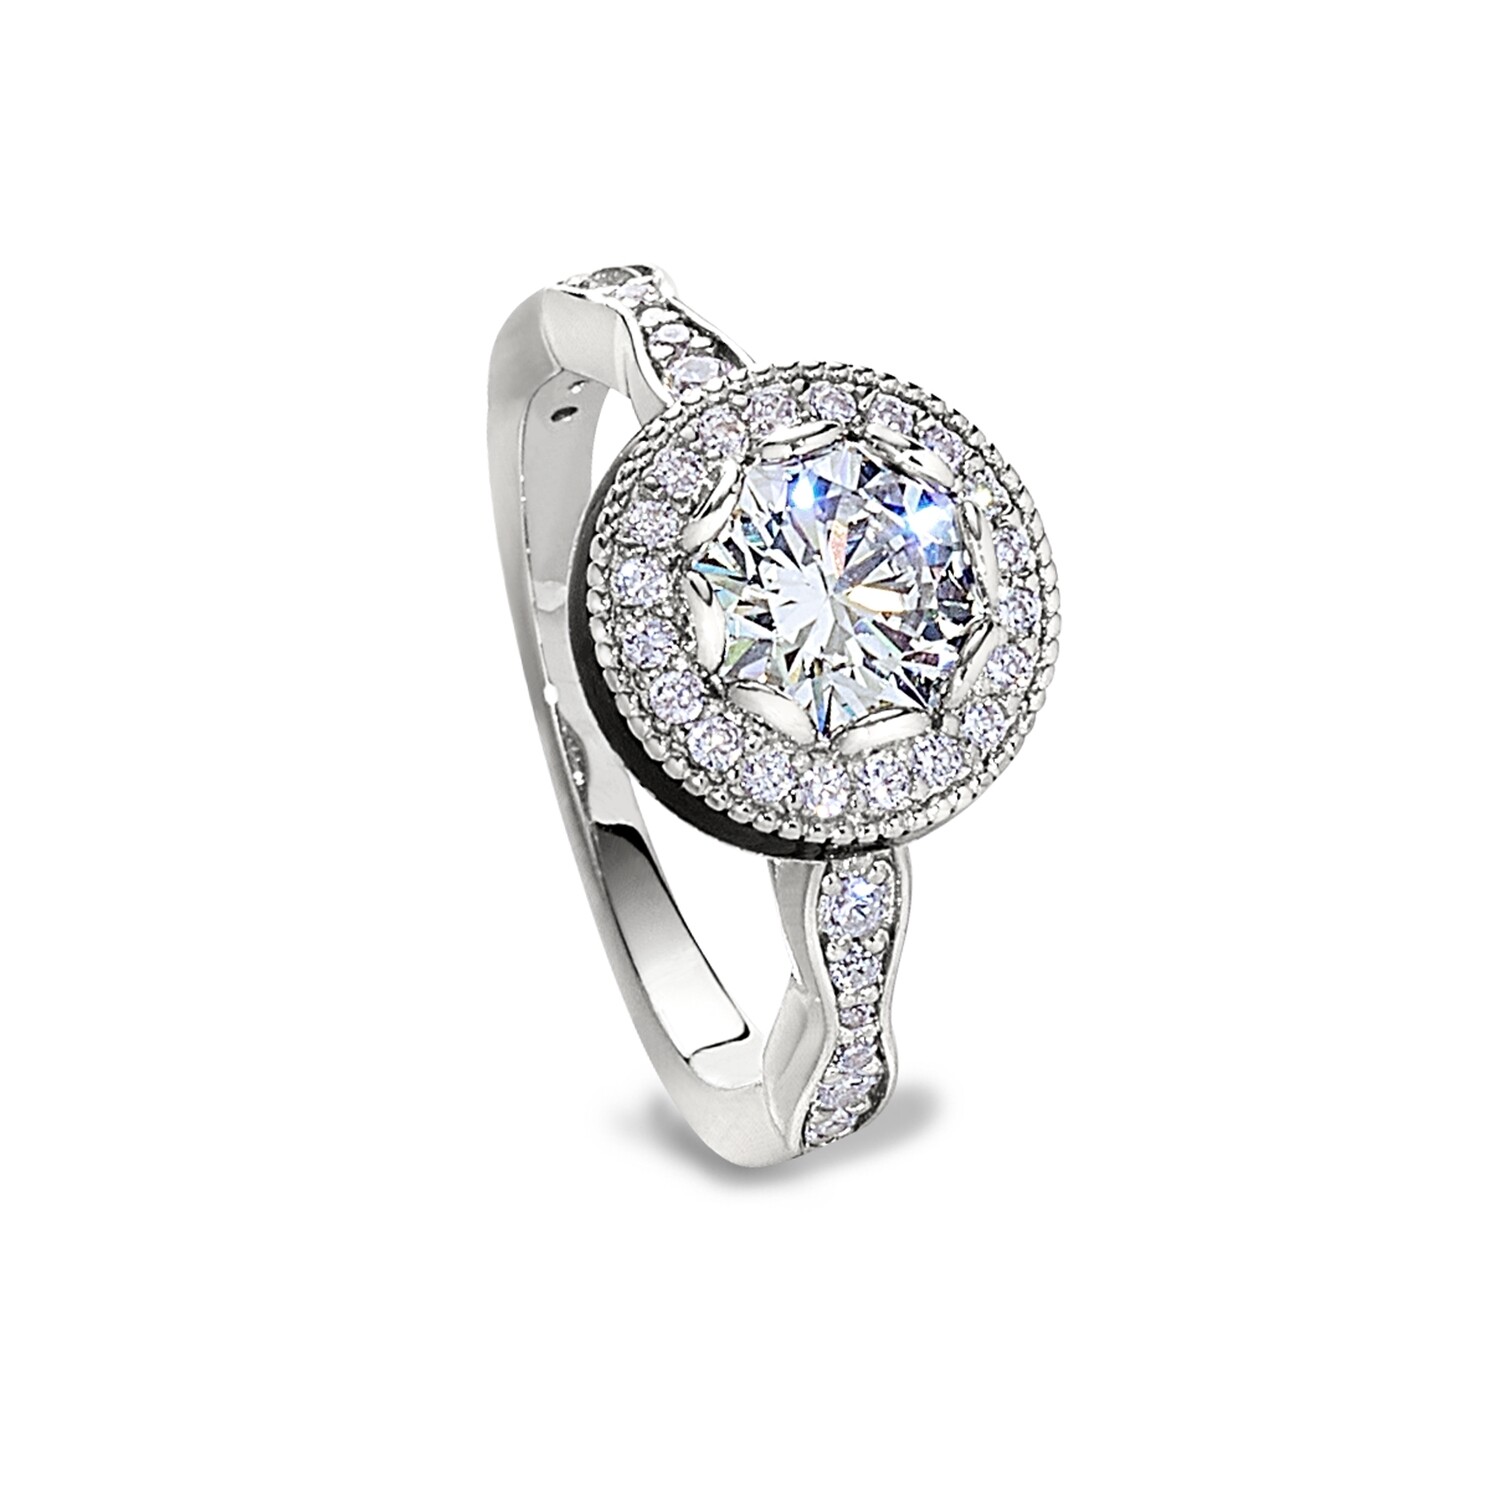 Silver Round Simulated Diamond with Halo and Enamel Ring